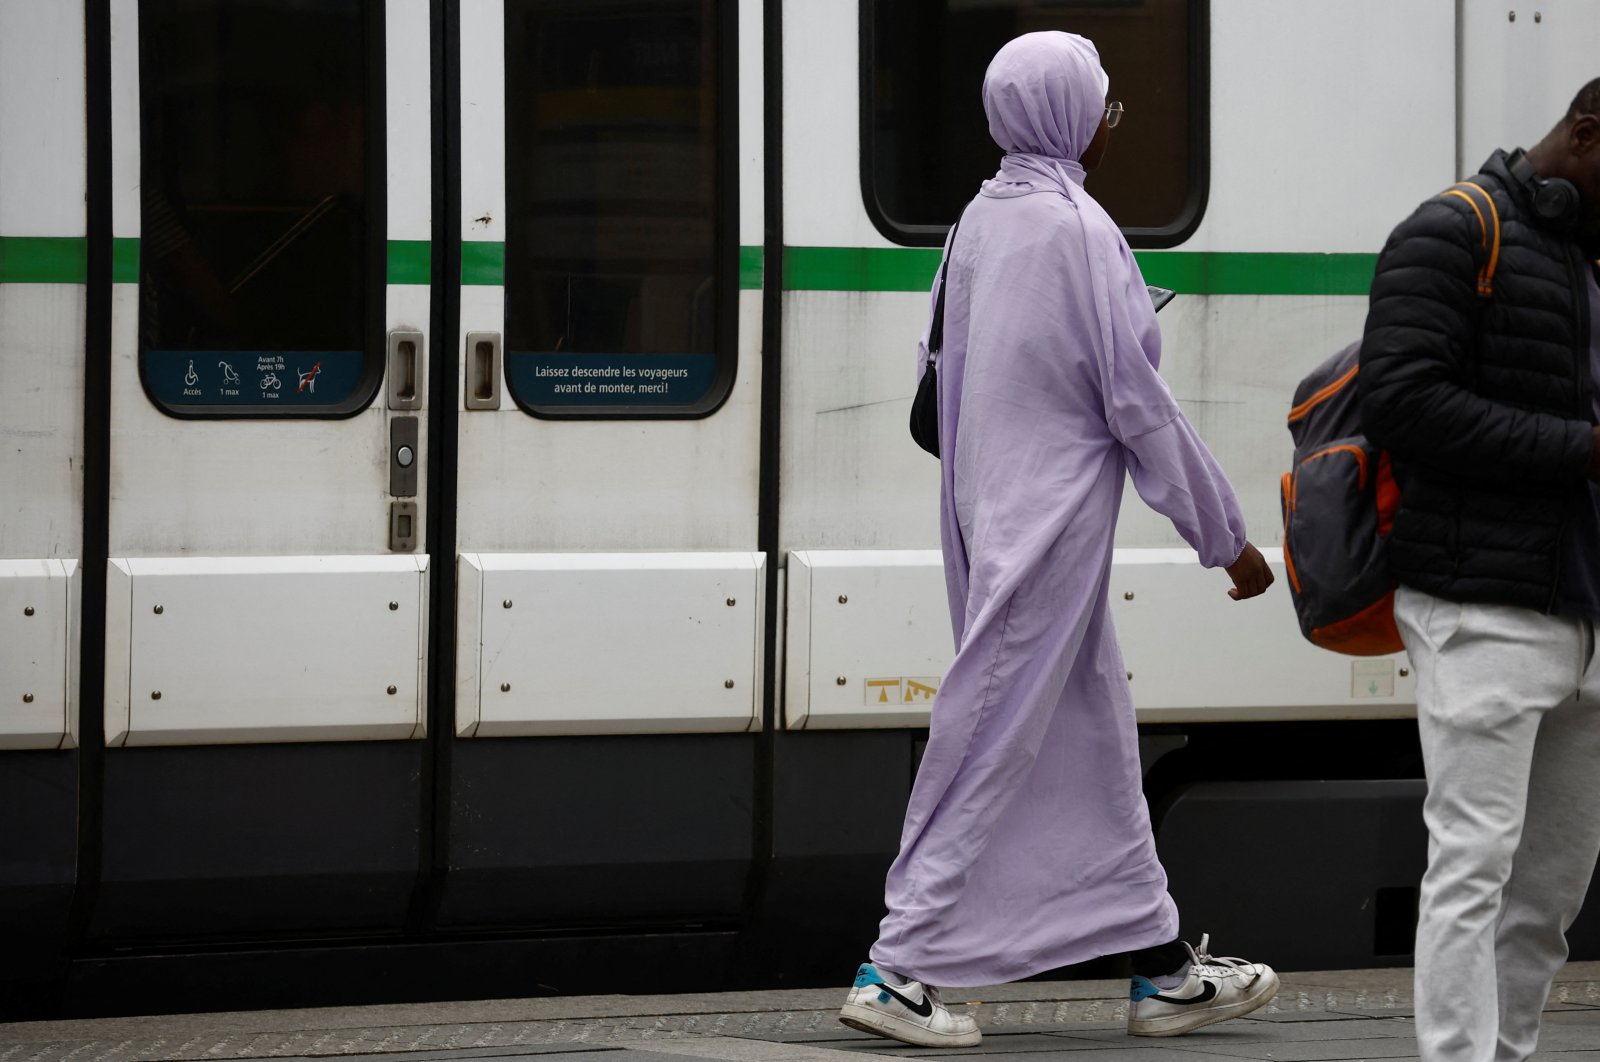 A Muslim woman, wearing the style of dress called an abaya, walks in a street in Nantes, France, Aug. 29, 2023. (Reuters File Photo)